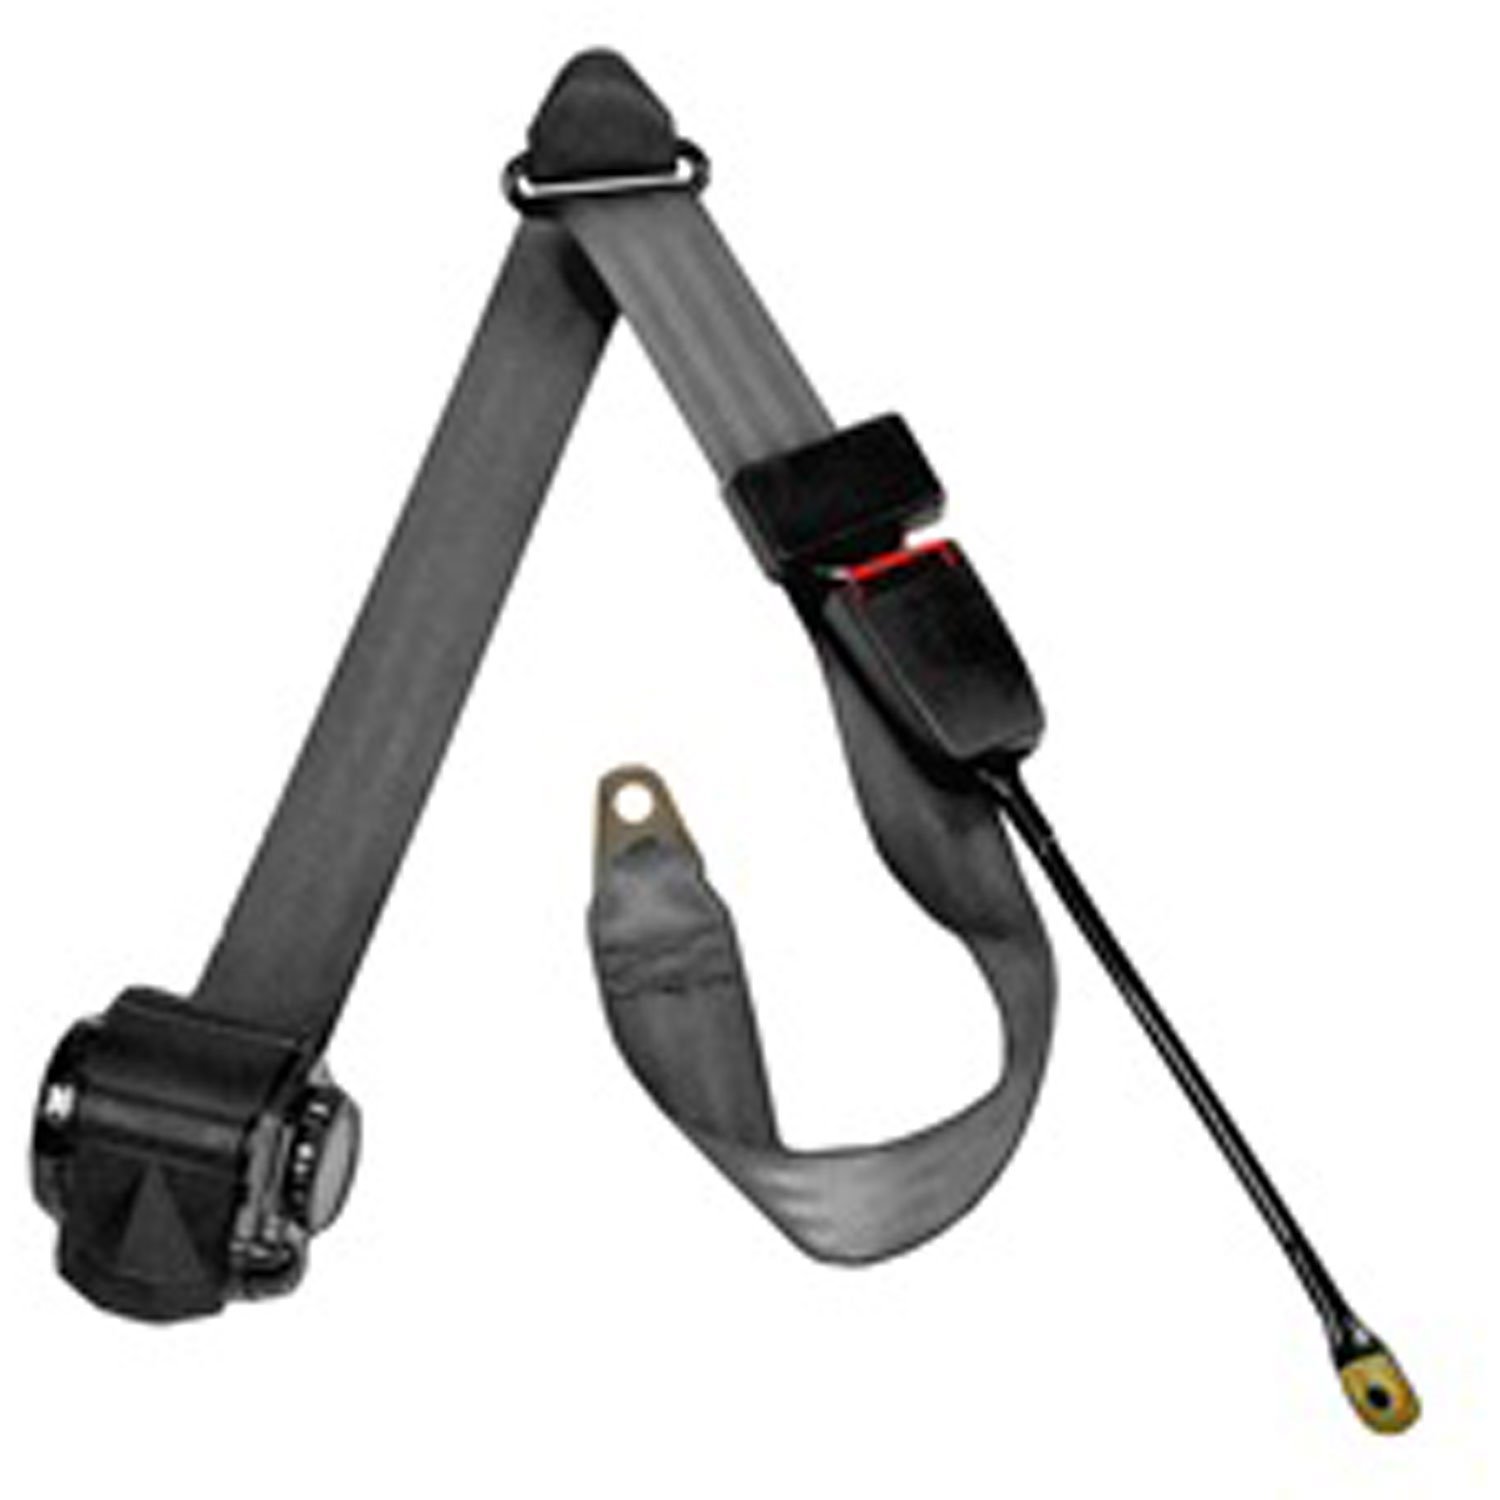 This black 3-point tri-lock off road seat belt fits the front or rear seats in 92-95 Jeep Wrangler Y